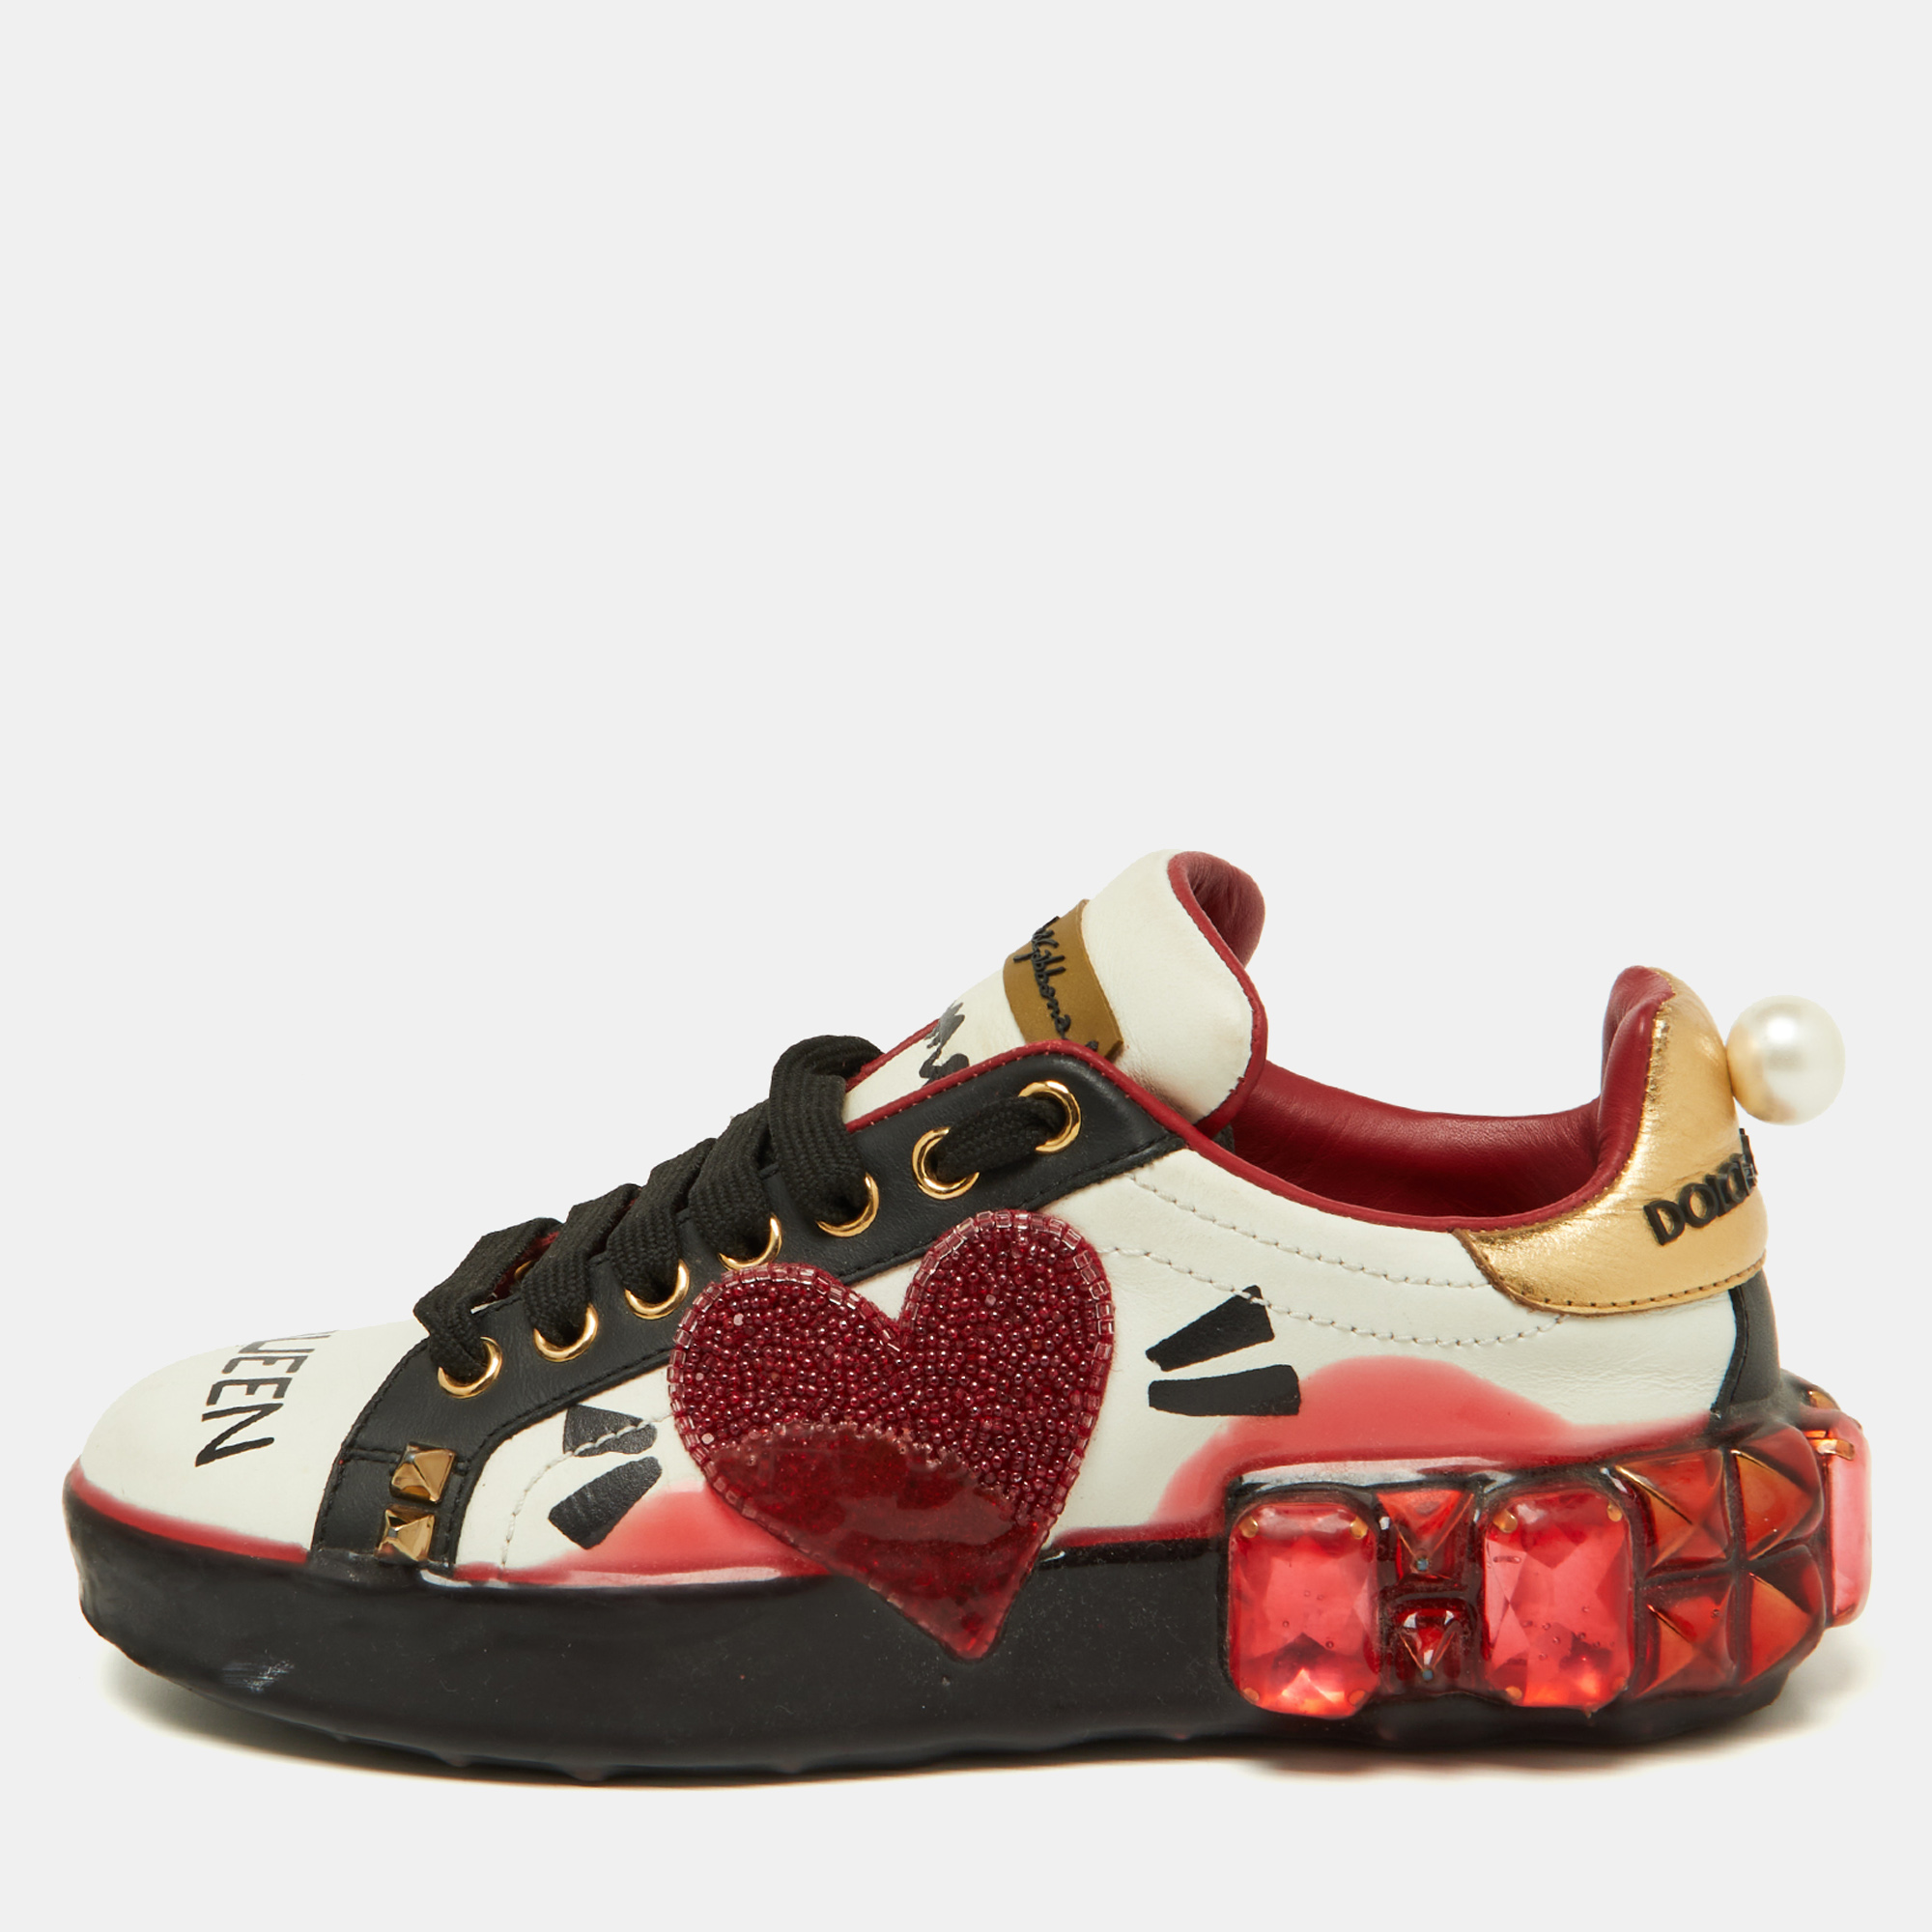 

Dolce & Gabbana Multicolor Leather Portofino Embellished Low Top Sneakers Size